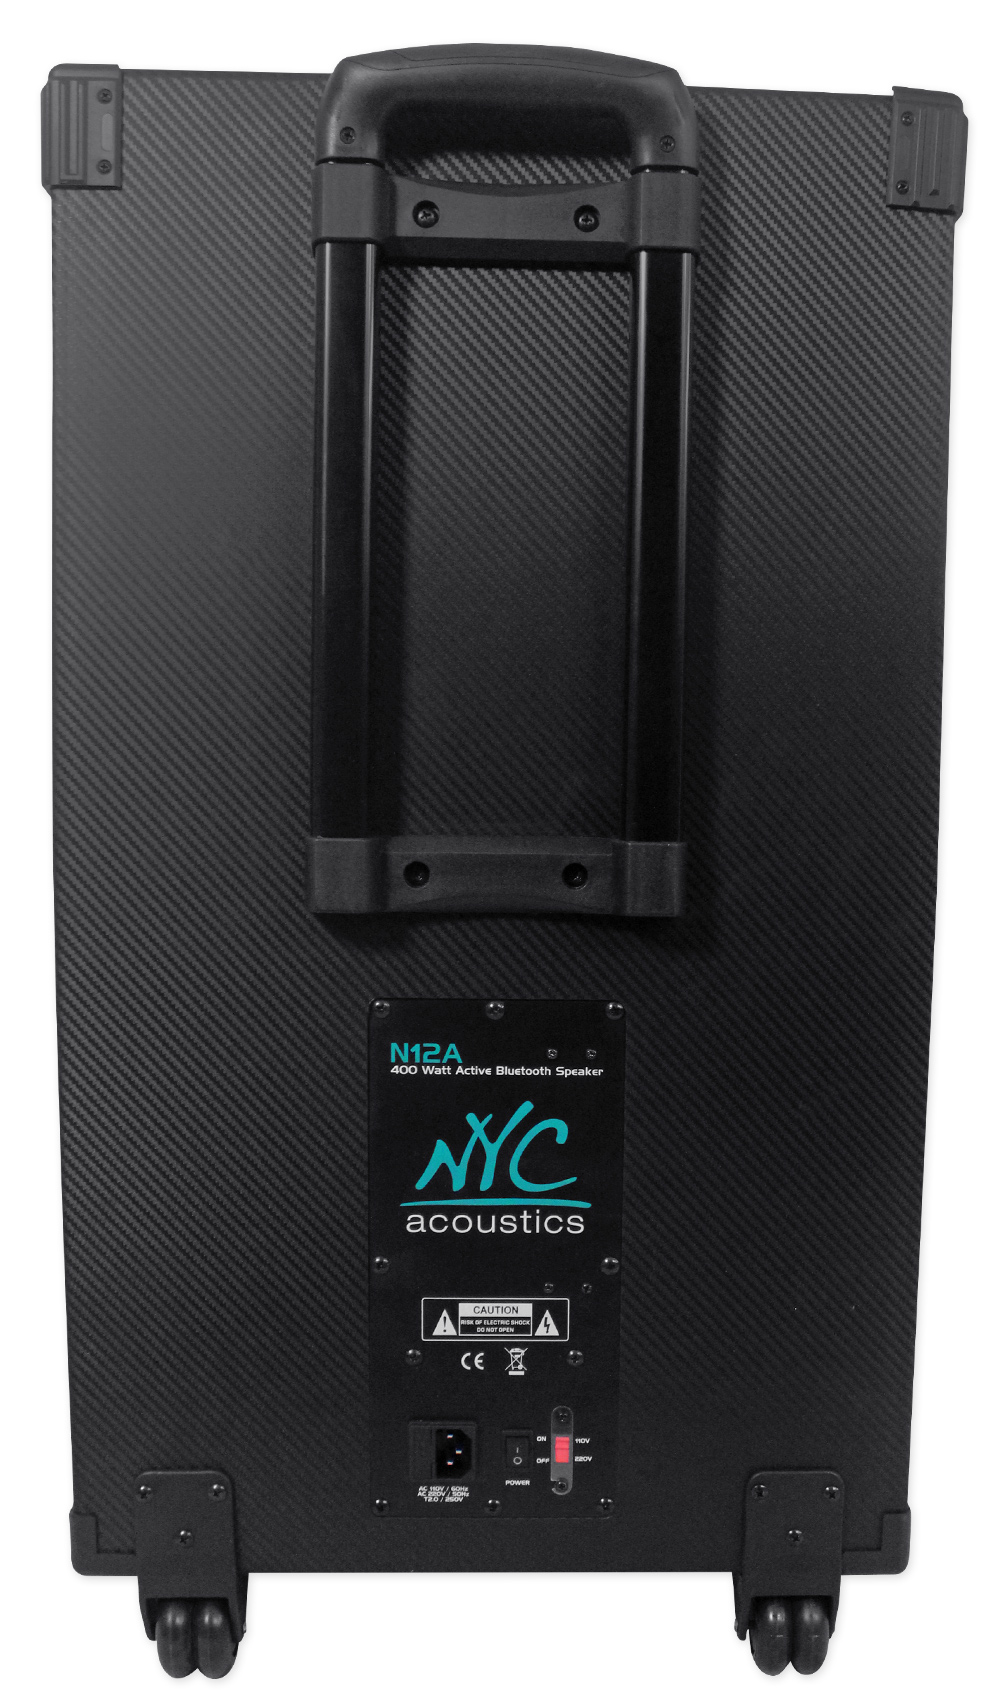 NYC Acoustics N12A 12" 400w Powered Speaker Bluetooth, Party Lights+Microphone - image 5 of 9